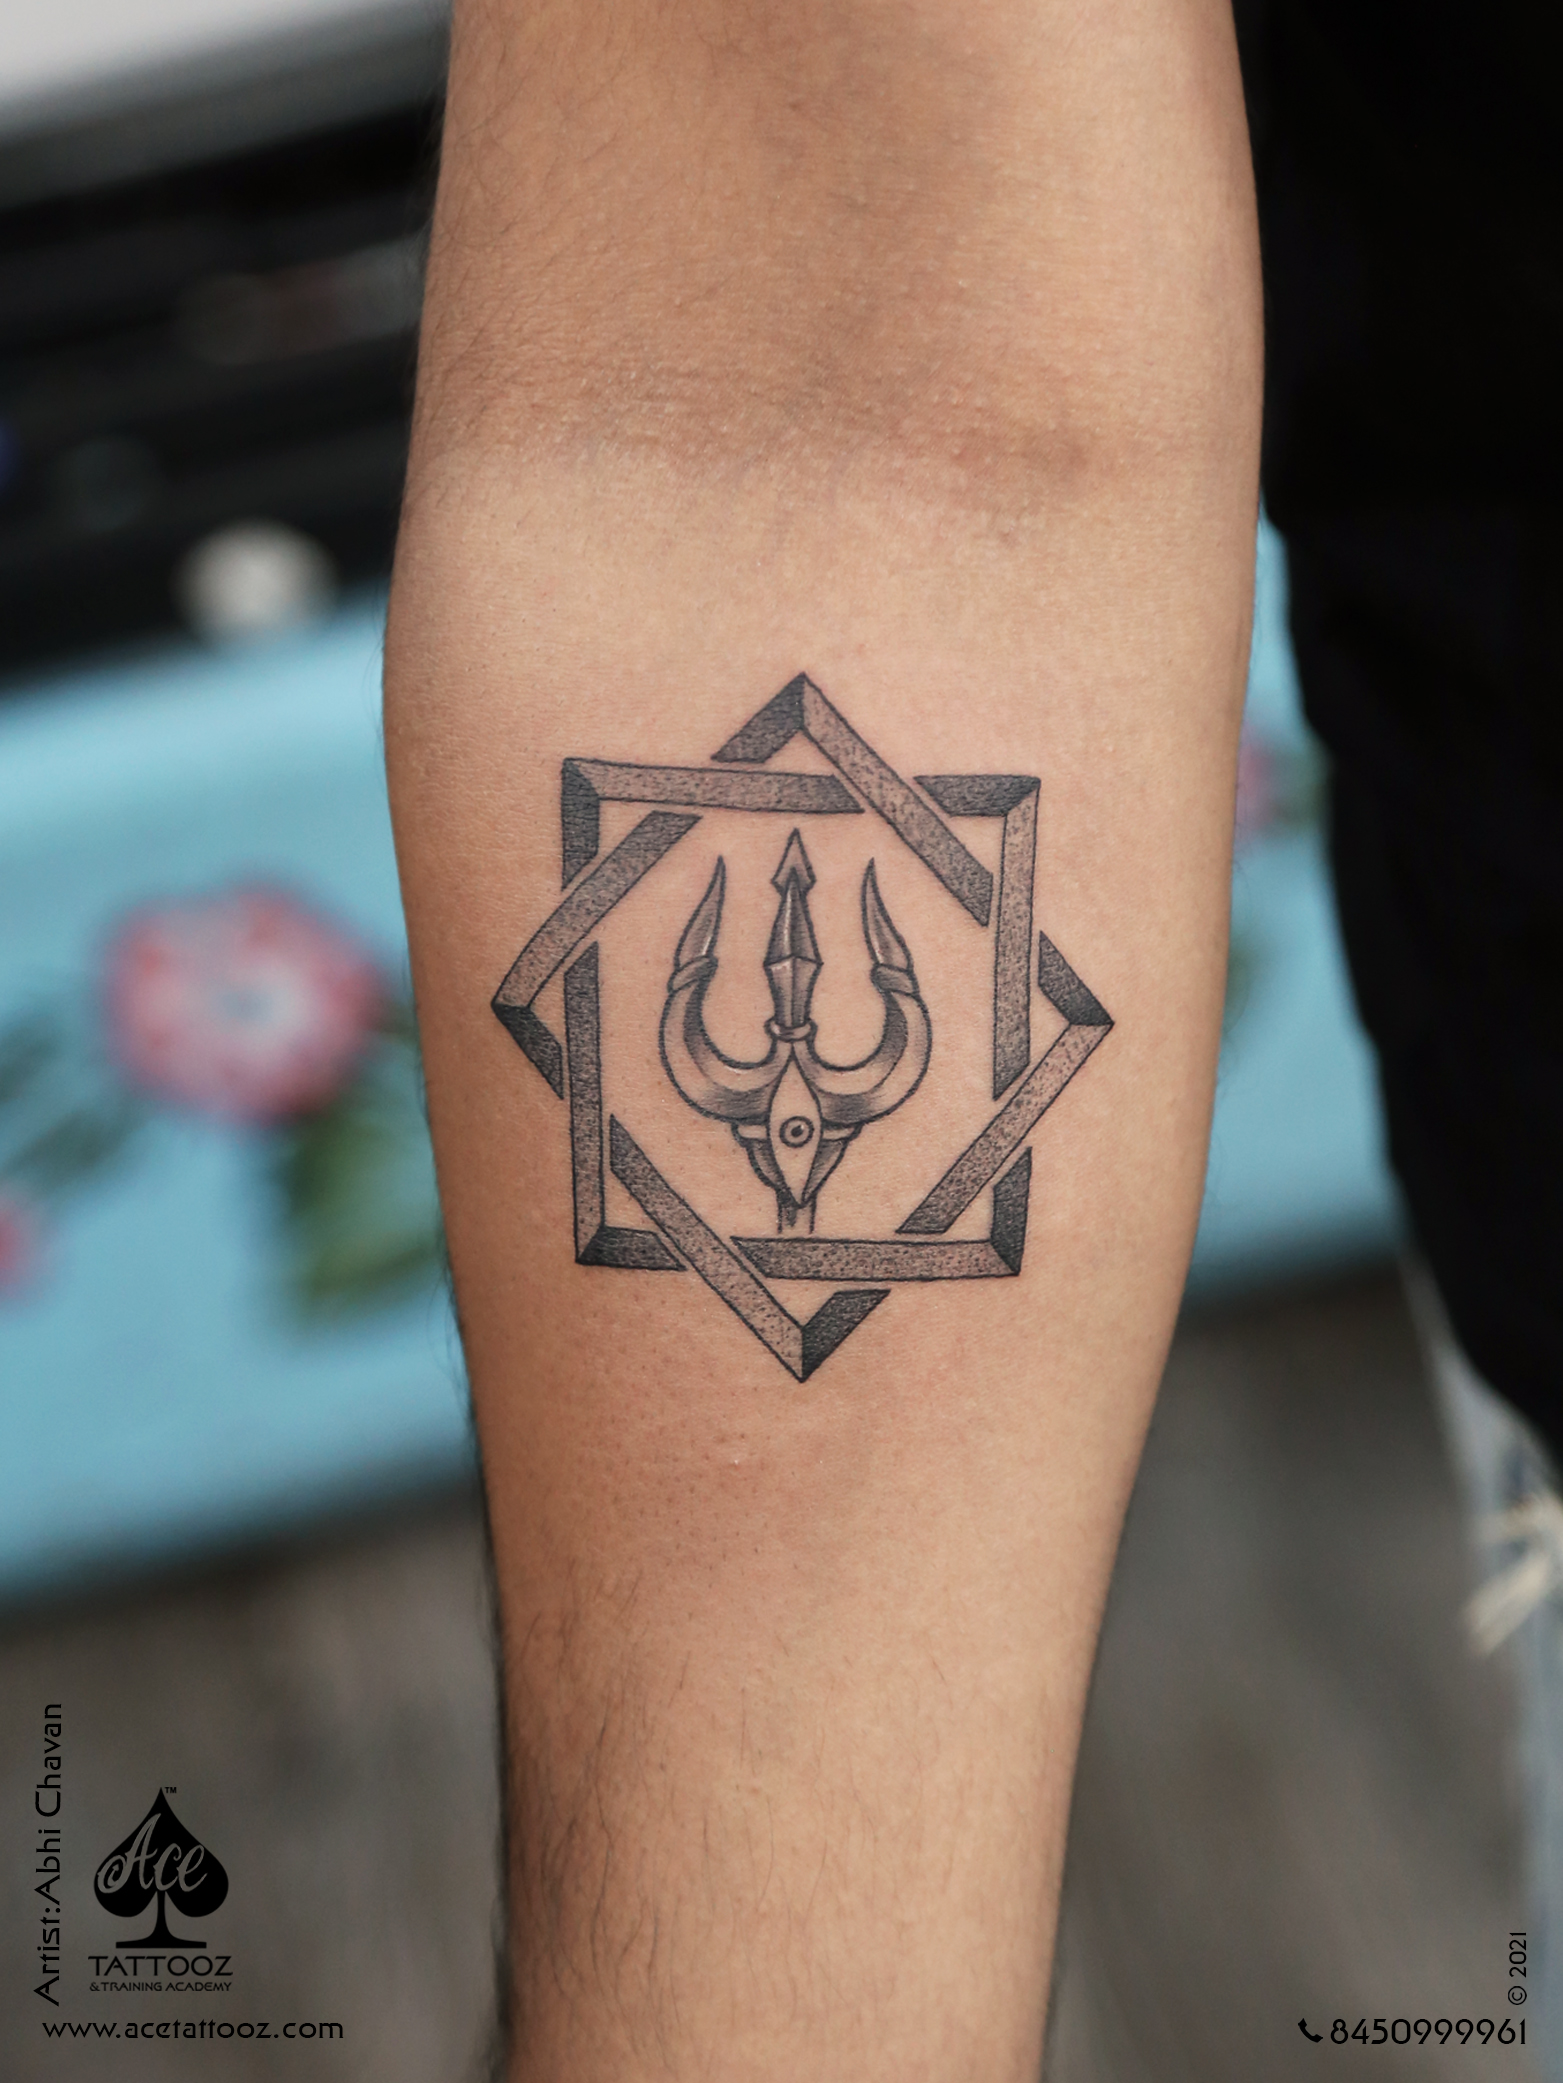 LORD SHIV-SHAKTI TATTOO Originally customised design create by  @jazzinktattoos of SHIV-SHAKTI & their related elements. For tattoo or… |  Instagram